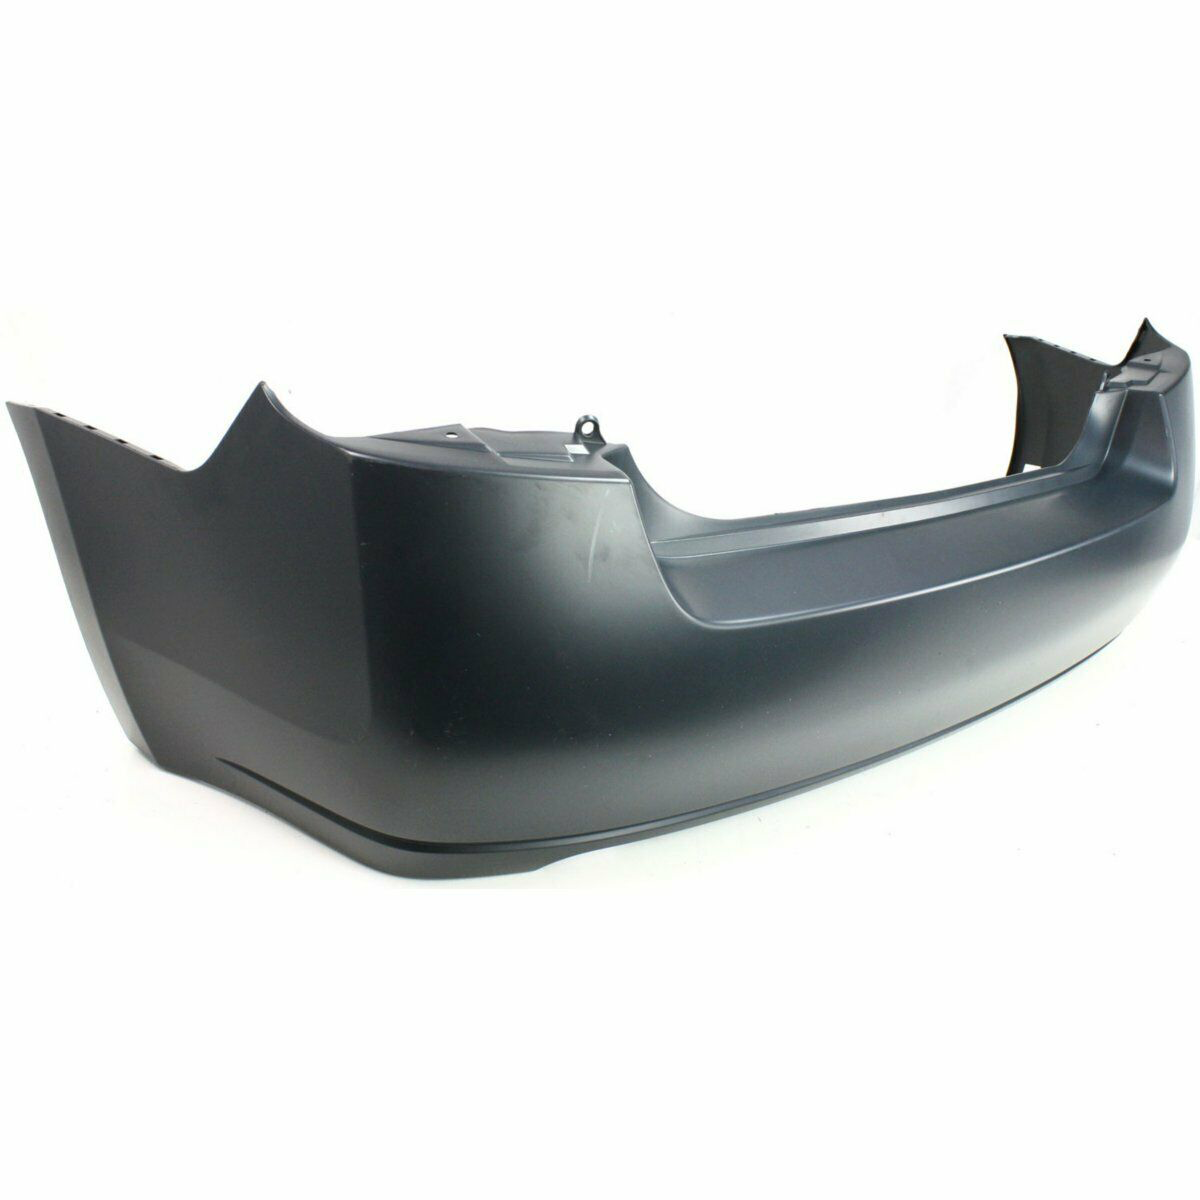 2010-2012 Nissan Sentra 2.0L Rear Bumper Painted to Match